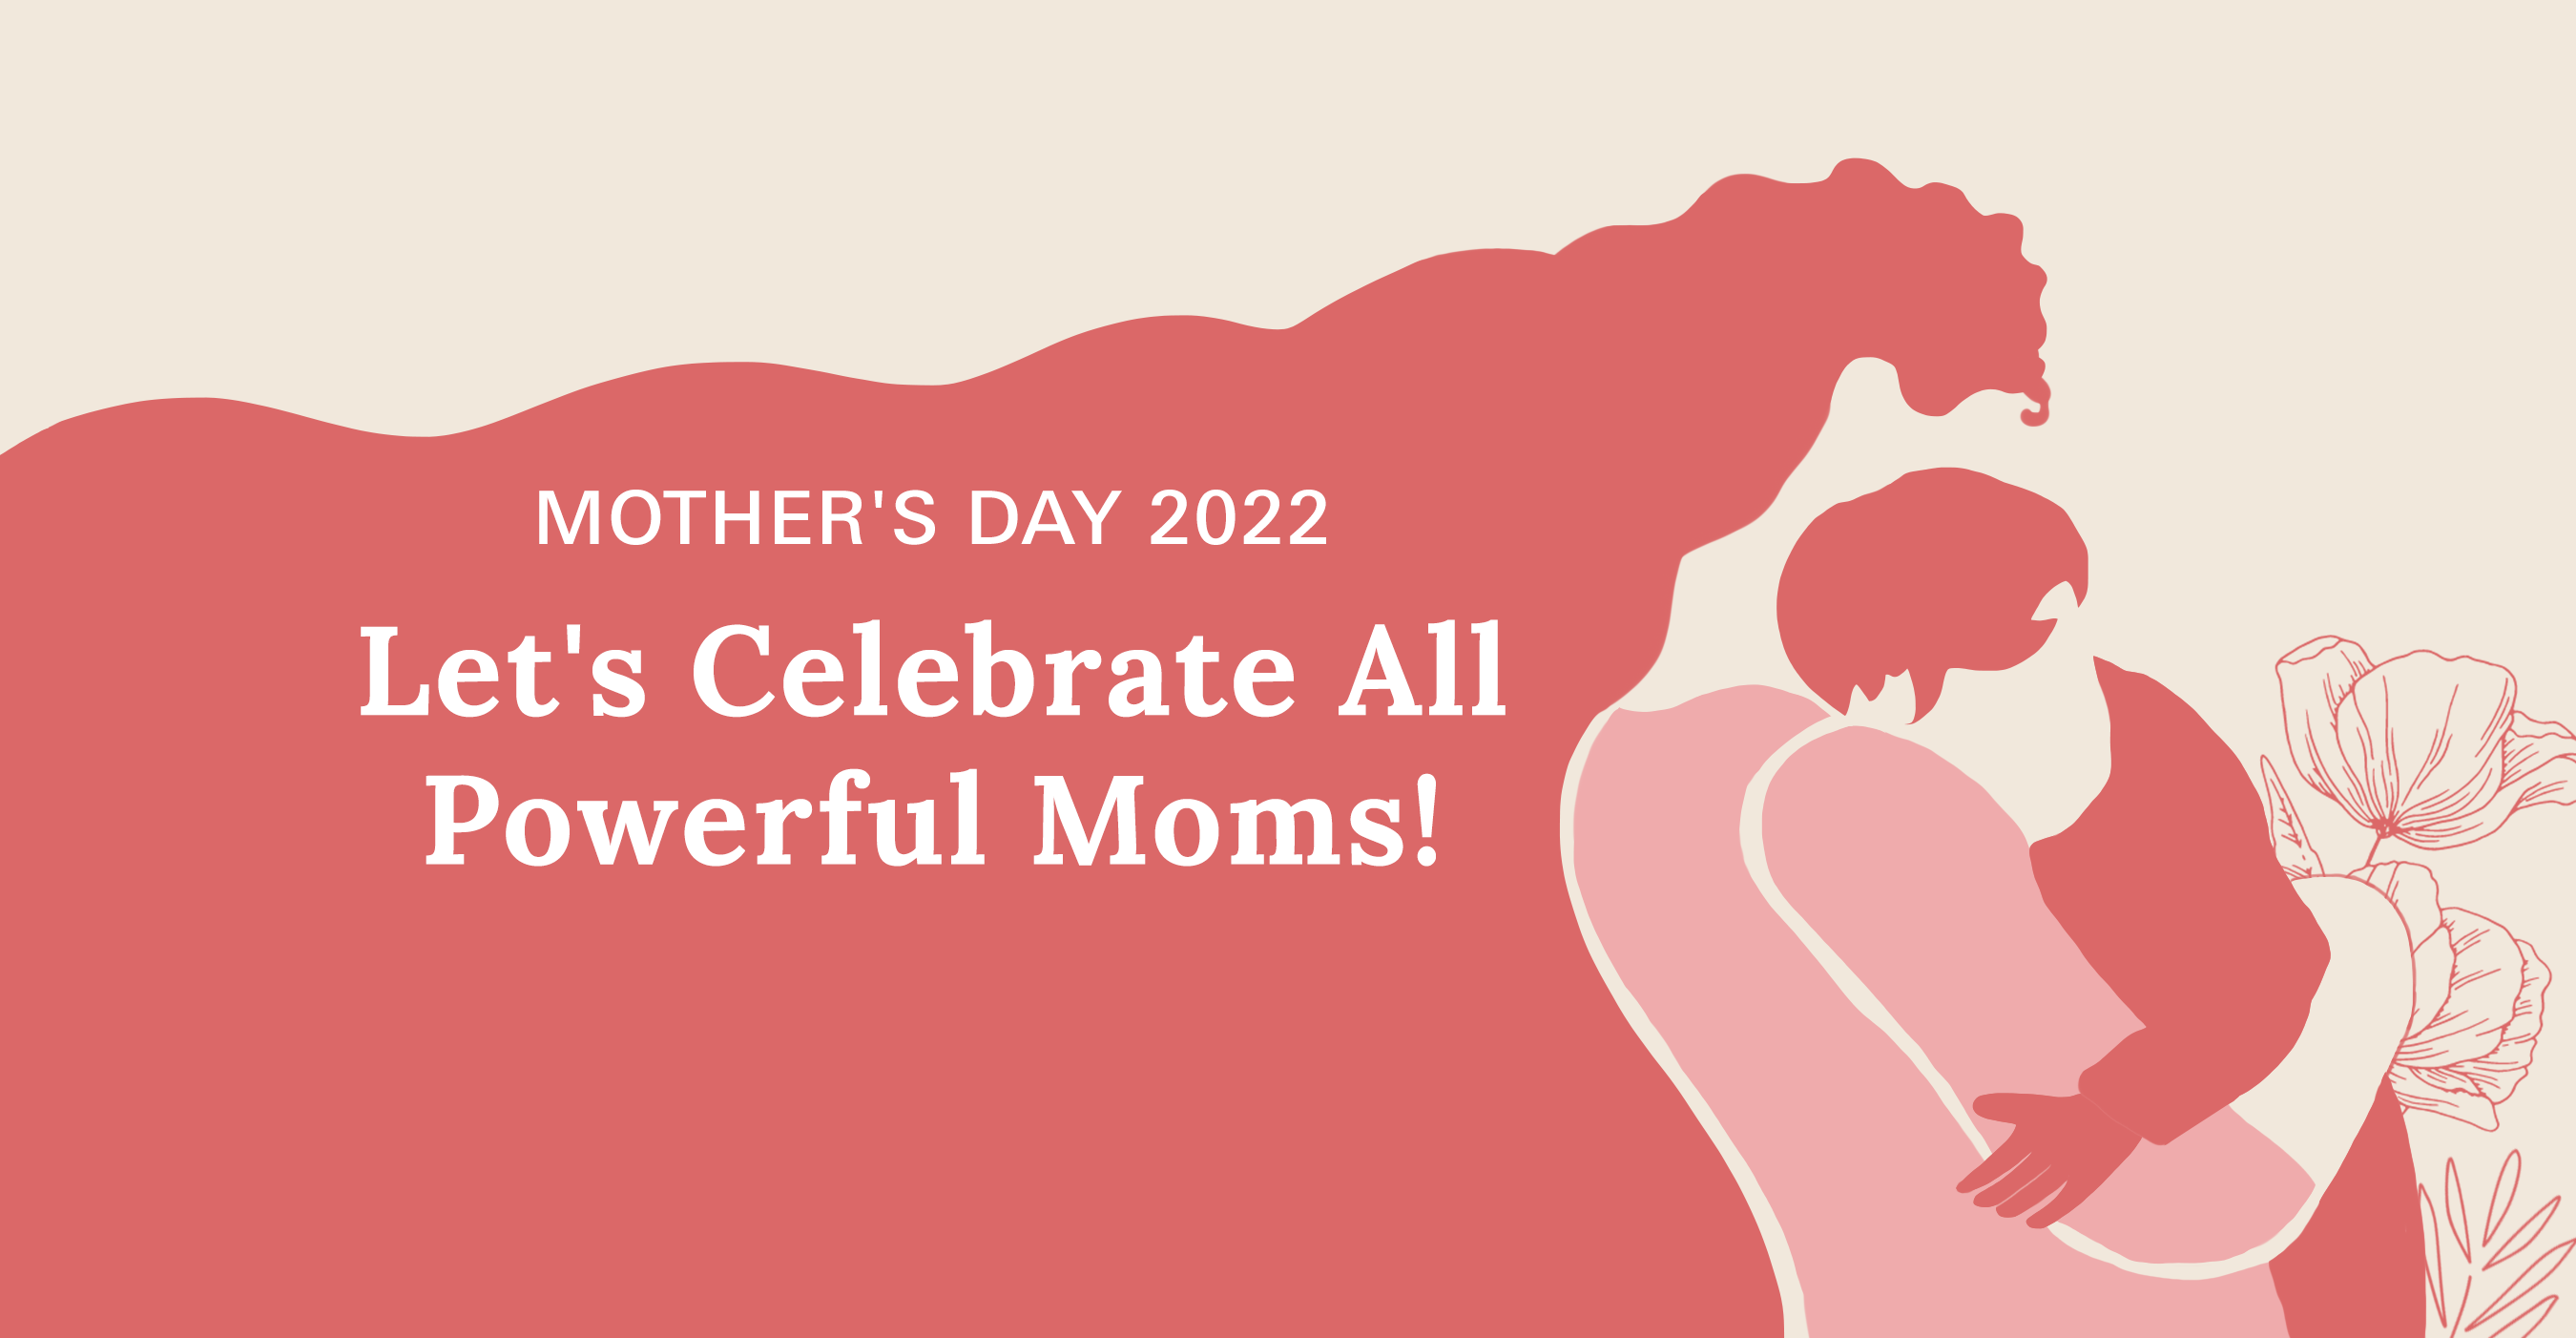 Mother's Day 2022 : Let's Celebrate All Powerful Moms!